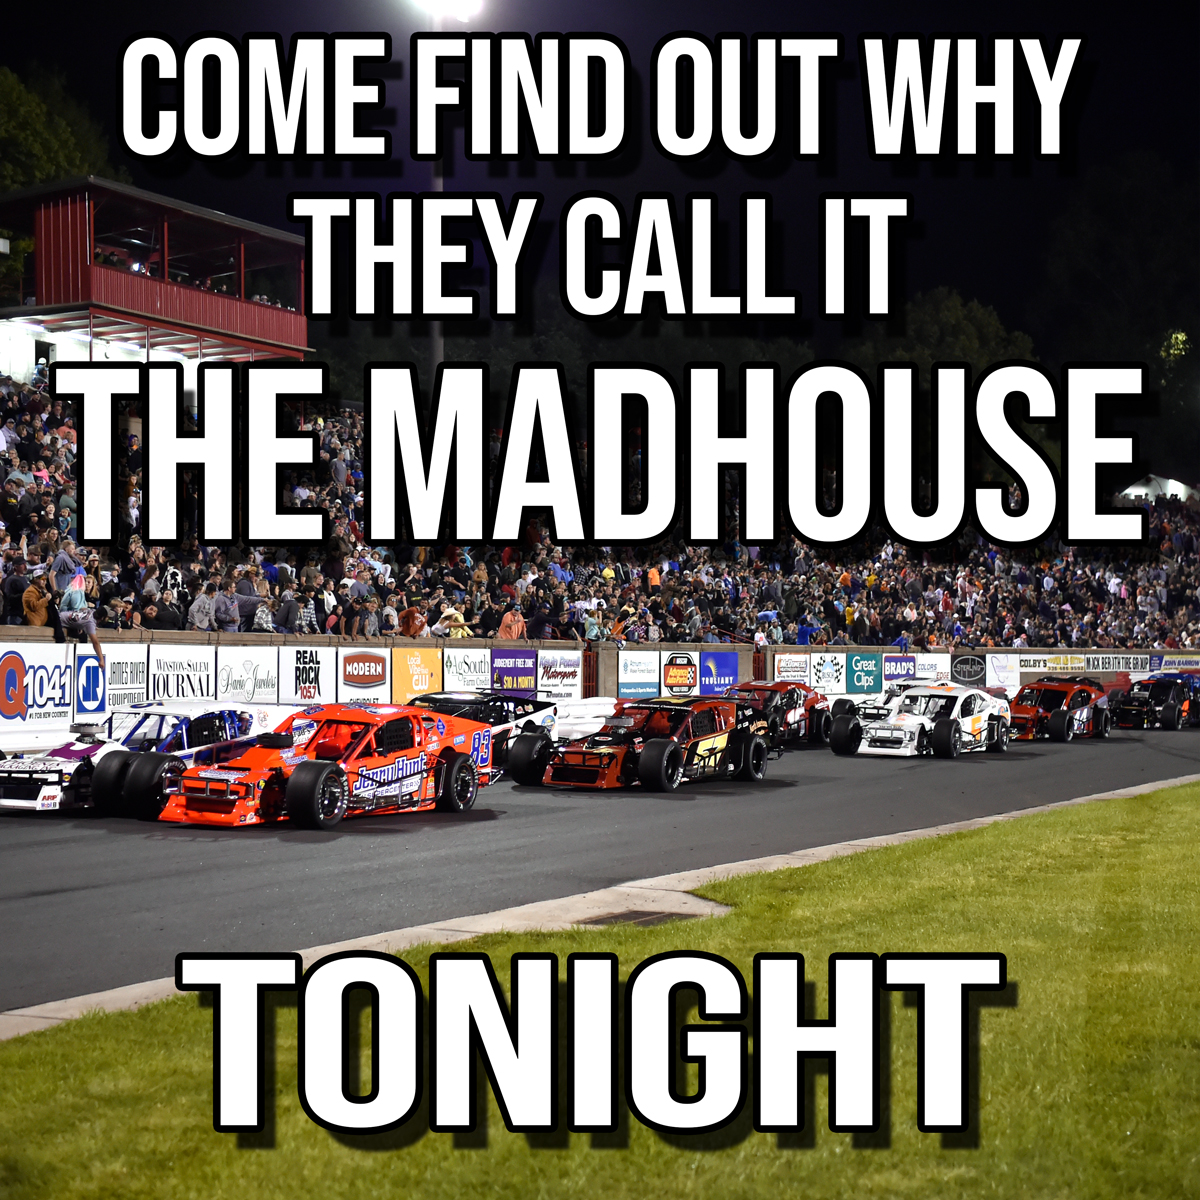 The weather last week may have delayed the racing... but nothing can stop the action at the Madhouse. We'll see you tonight for the Kevin Powell Motorsports 100 for the Modifieds, the Thunder Road Bar & Grill Street Stock 50, and racing for three other divisions.